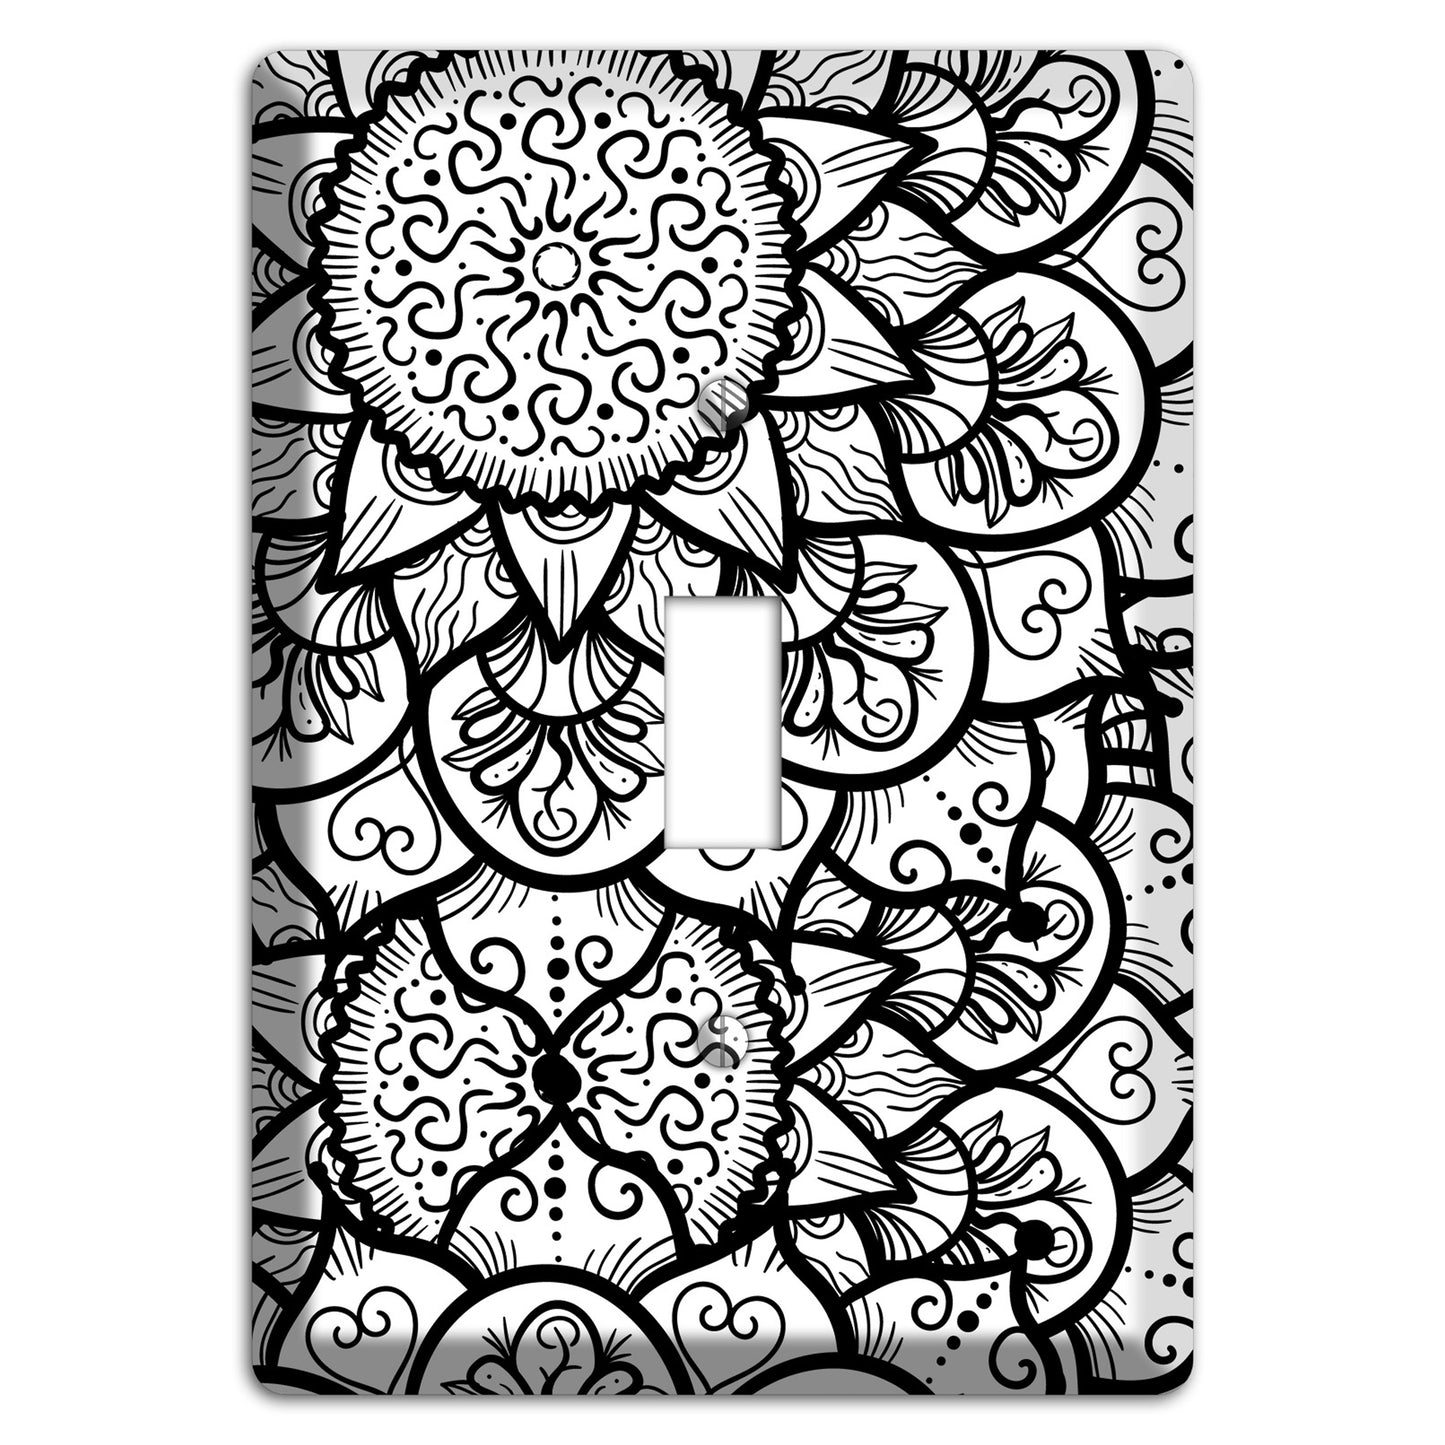 Mandala Black and White Style W Cover Plates Cover Plates